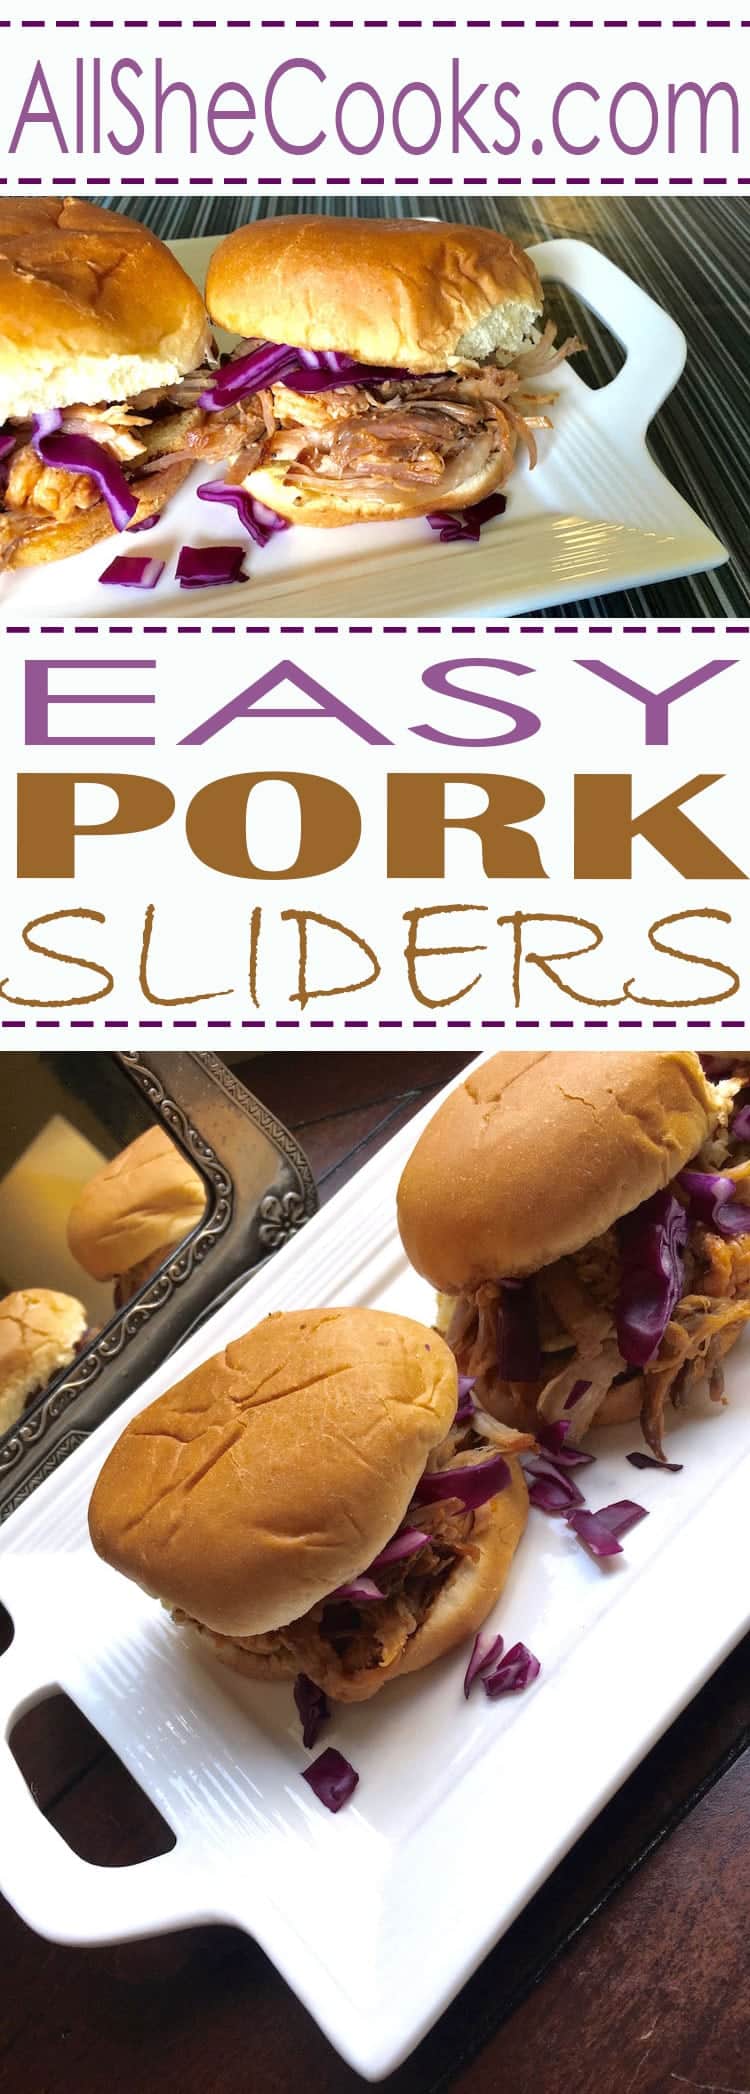 Pork Sliders recipe for an easy to make pork sandwich recipe that is always a big hit. Looking for a meal to feed a crowd? Make a big batch of Pork Sliders Sandwiches. They are always a winner.